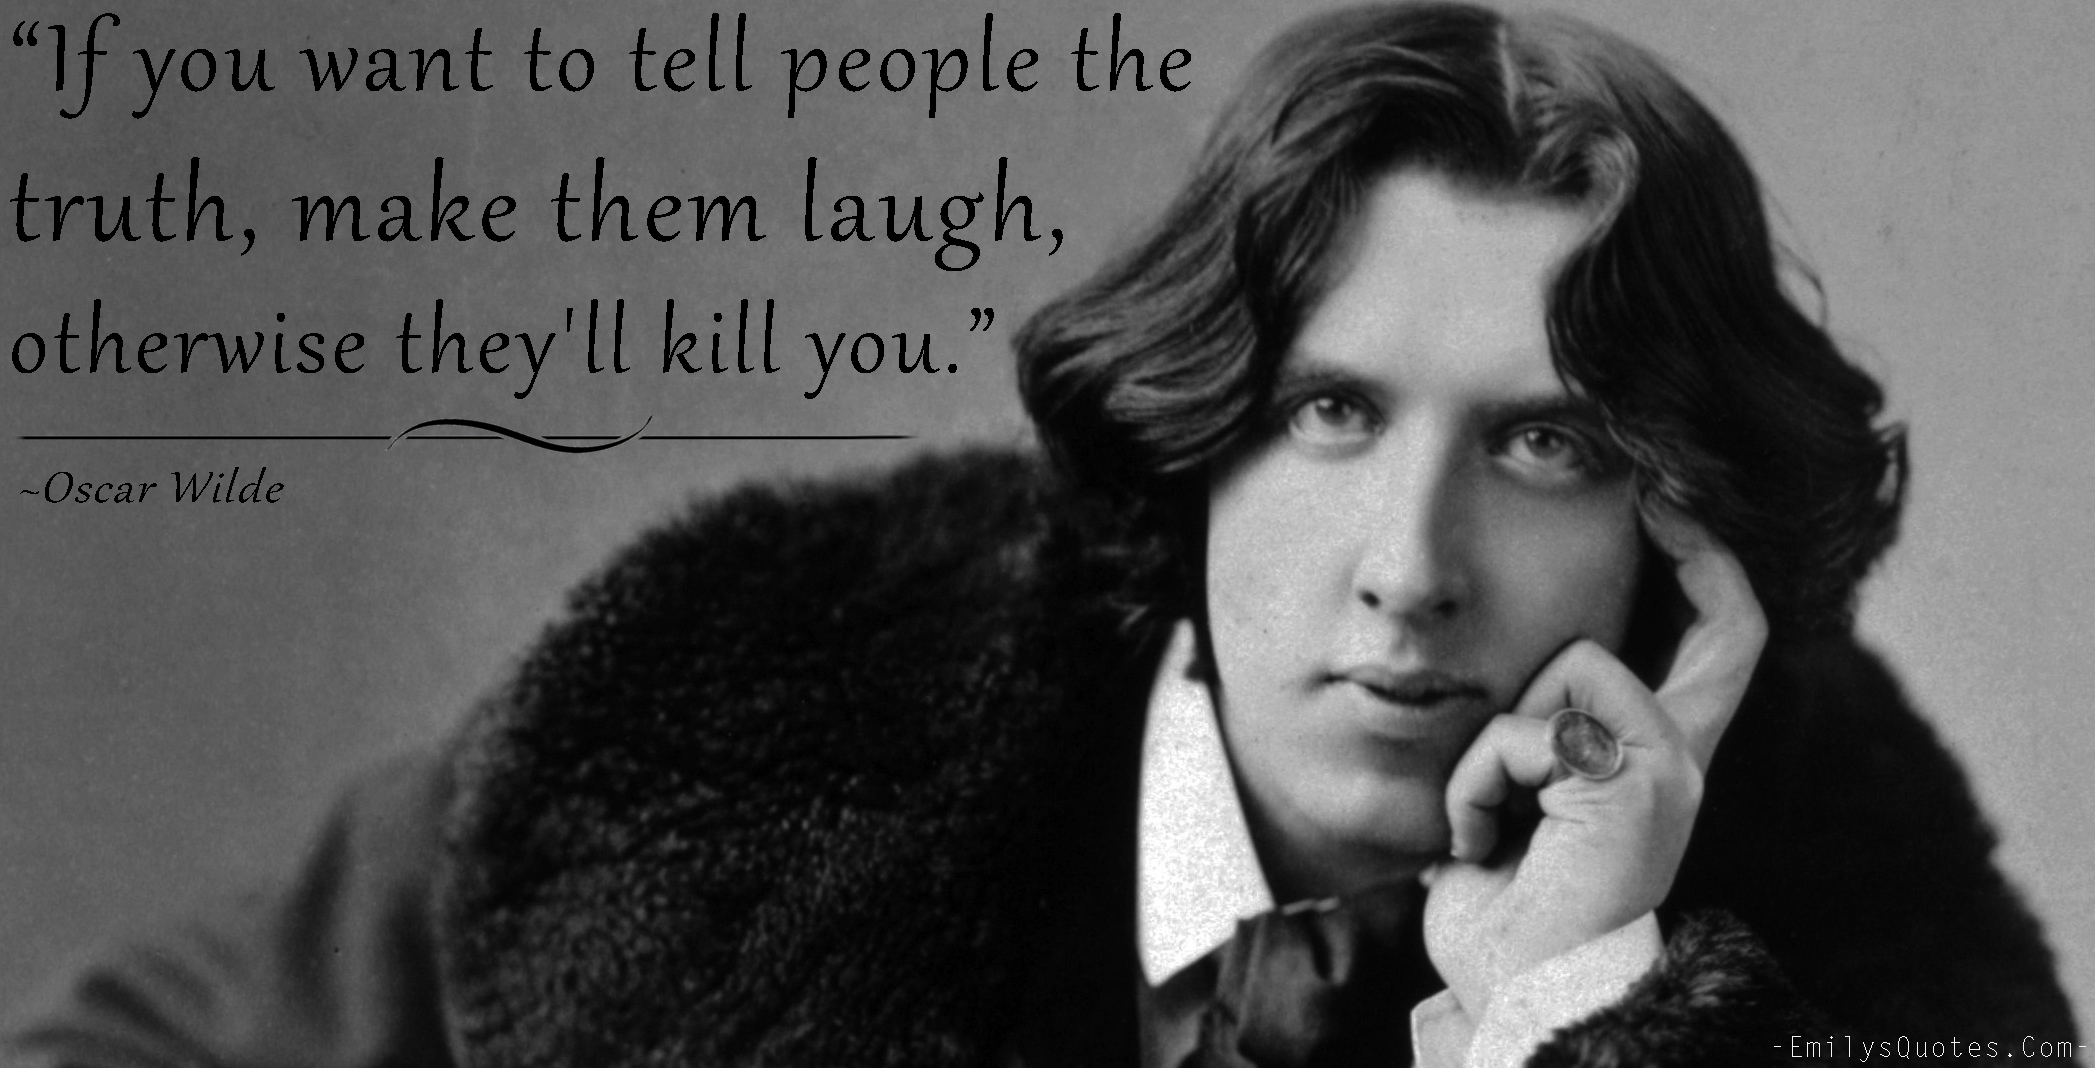 If you want to tell people the truth, make them laugh, otherwise they’ll kill you